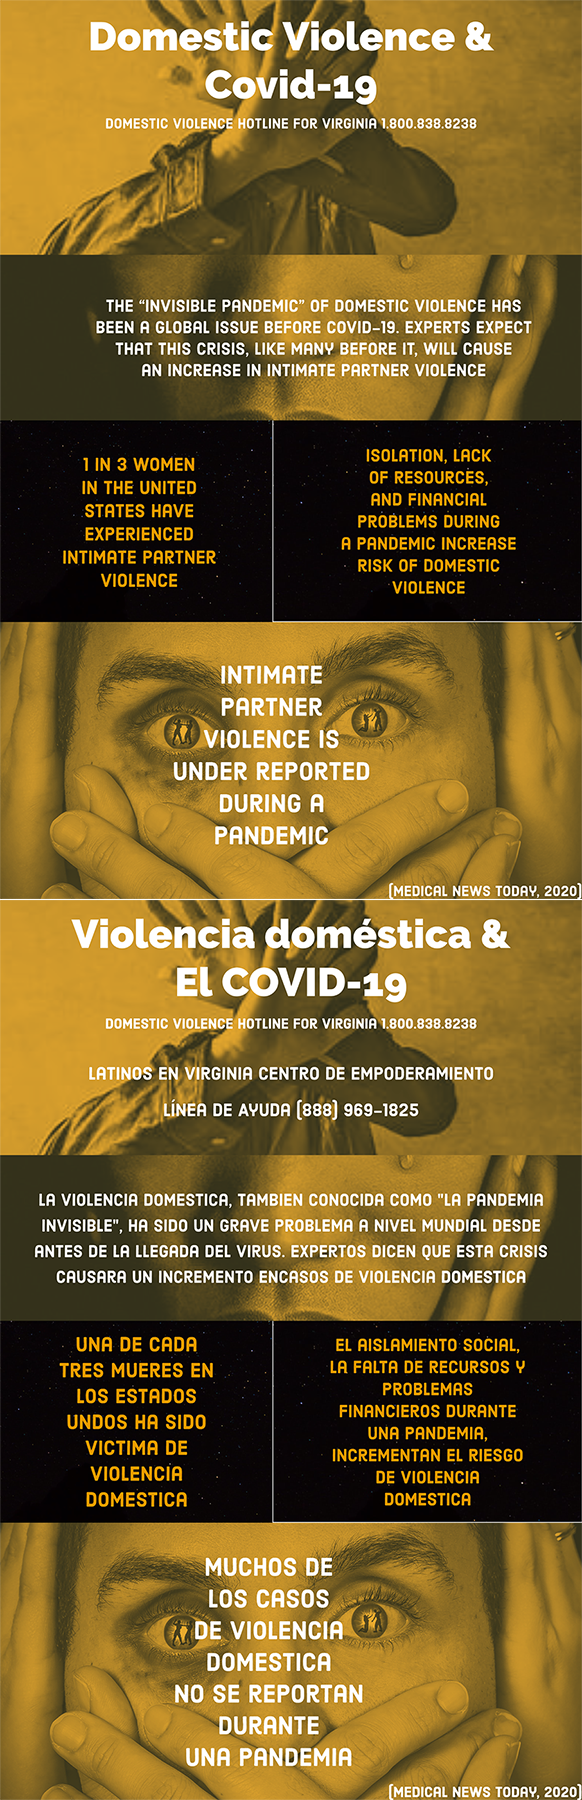 Domestic Violence and COVID-19 Resources Flyer in English & Spanish